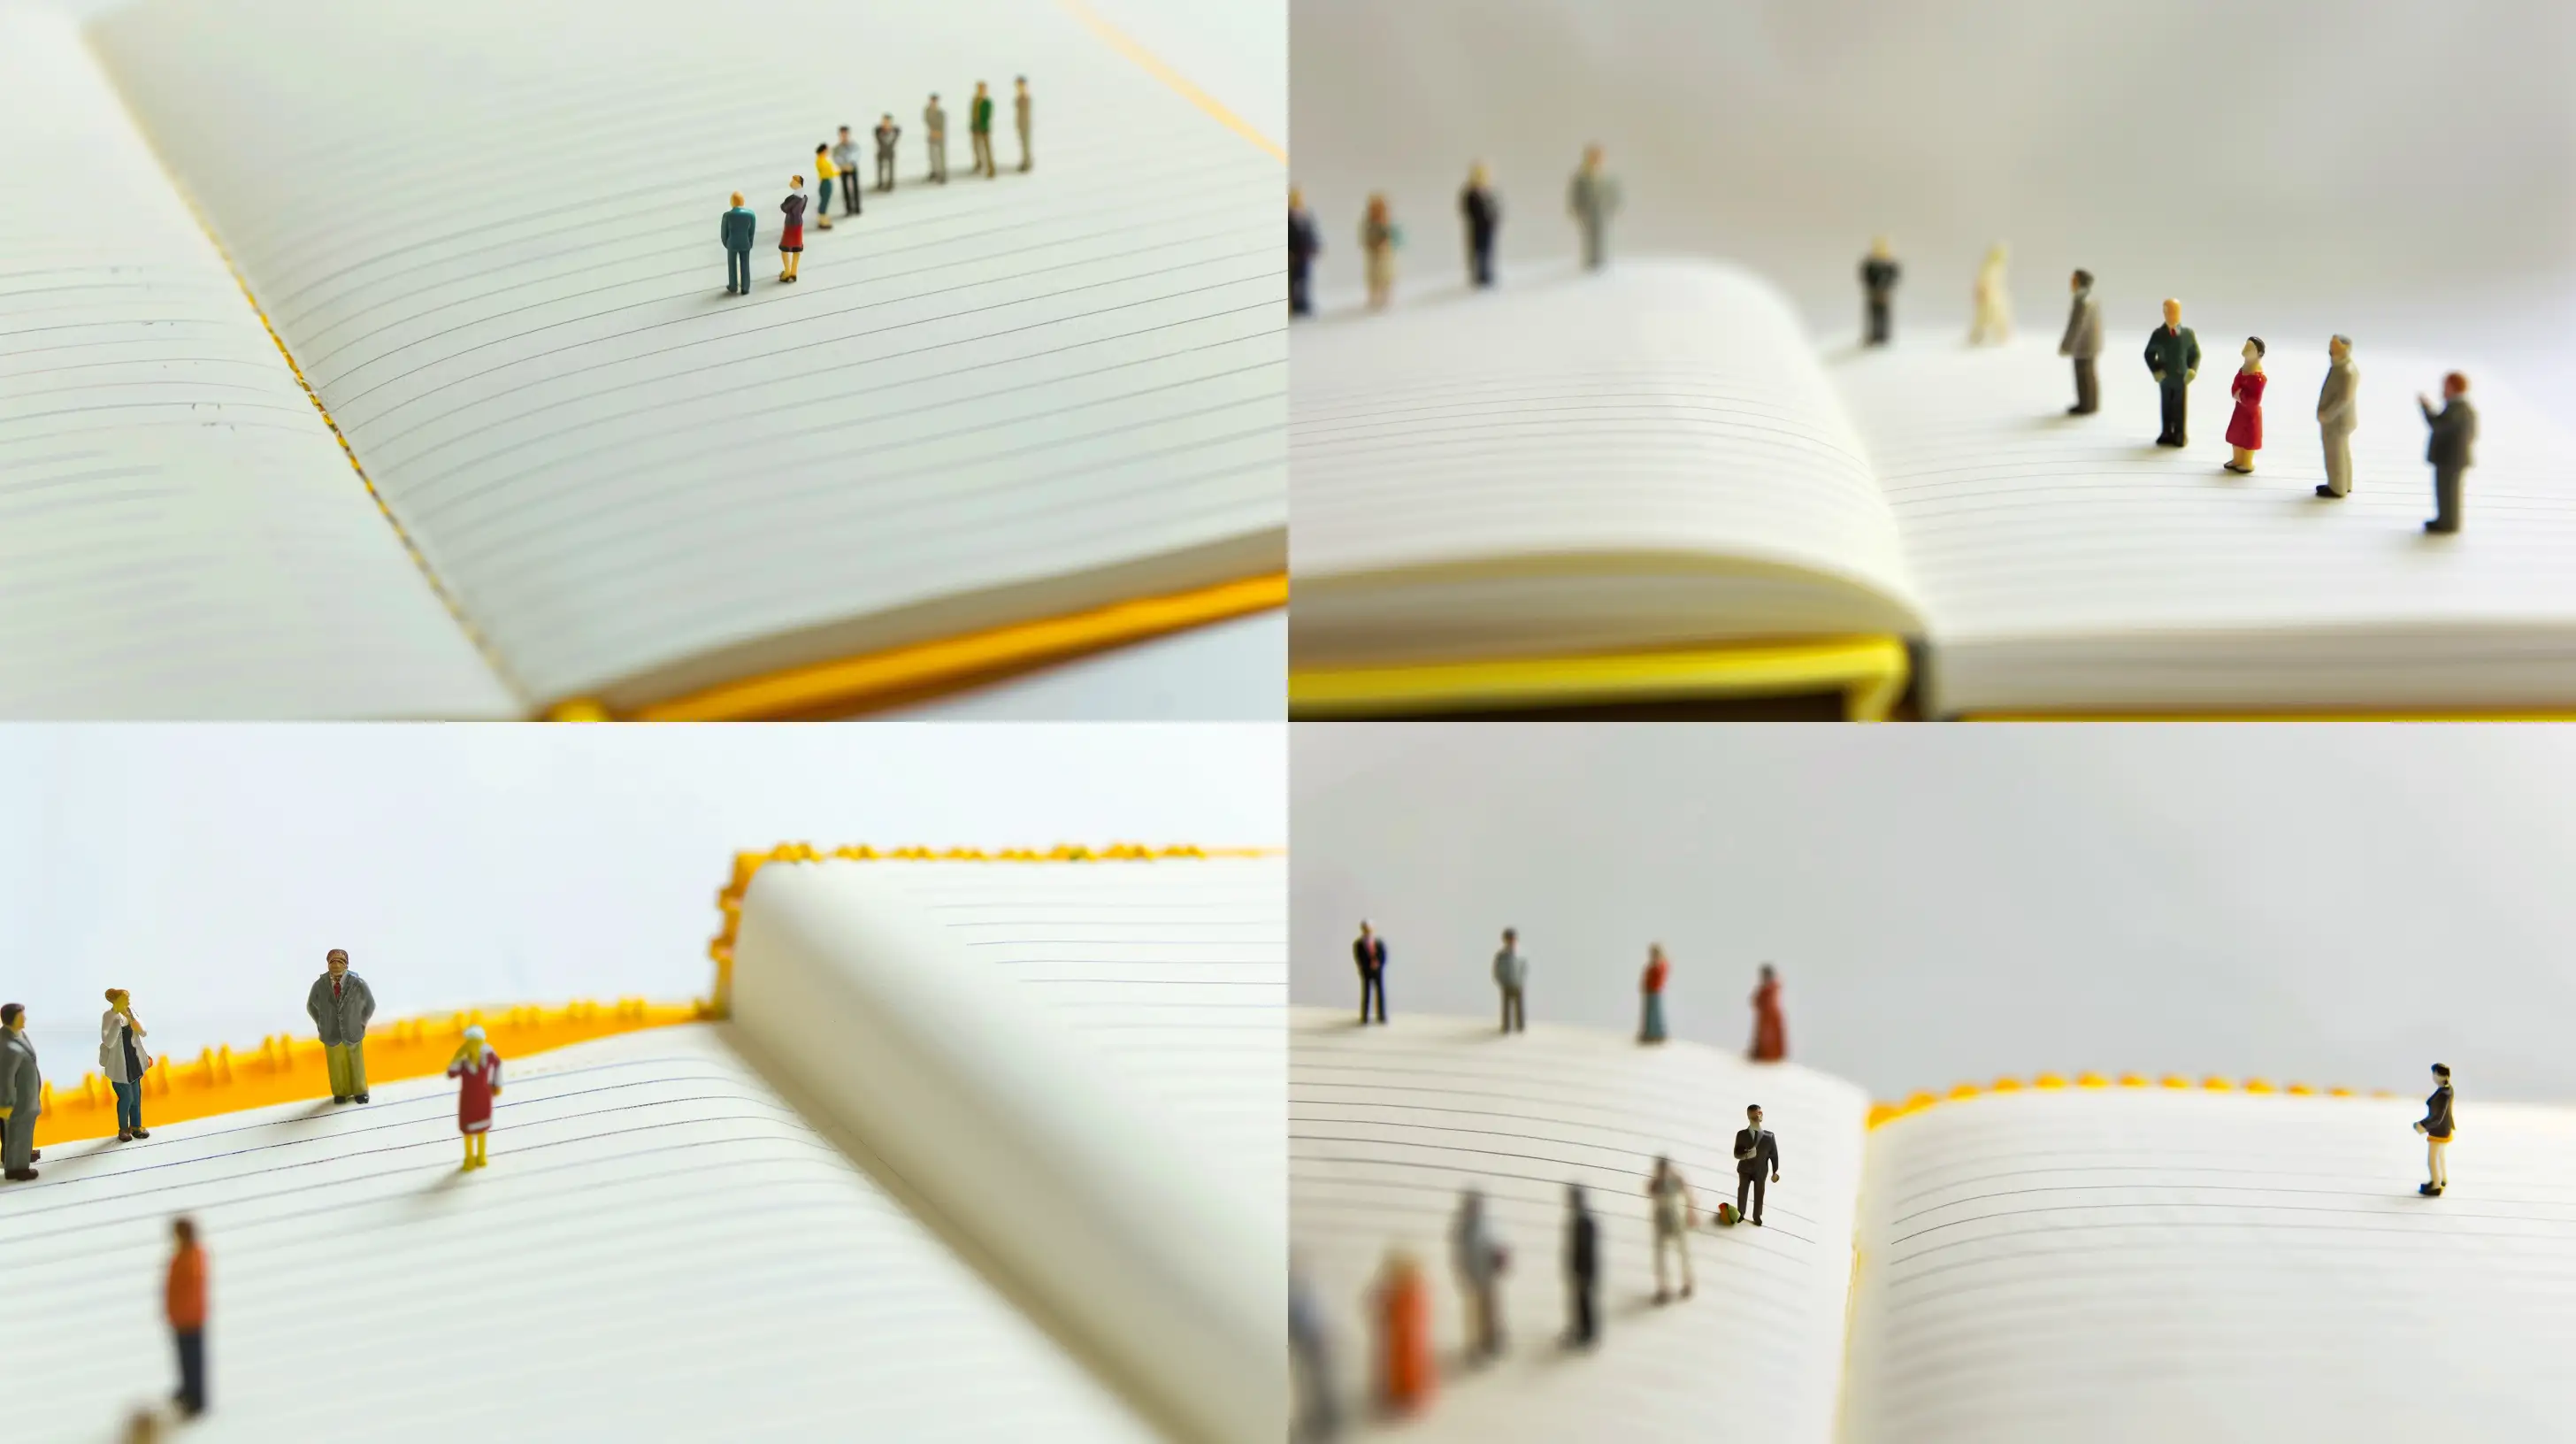 Miniature-People-Organized-on-Open-Notebook-with-Yellow-Edge